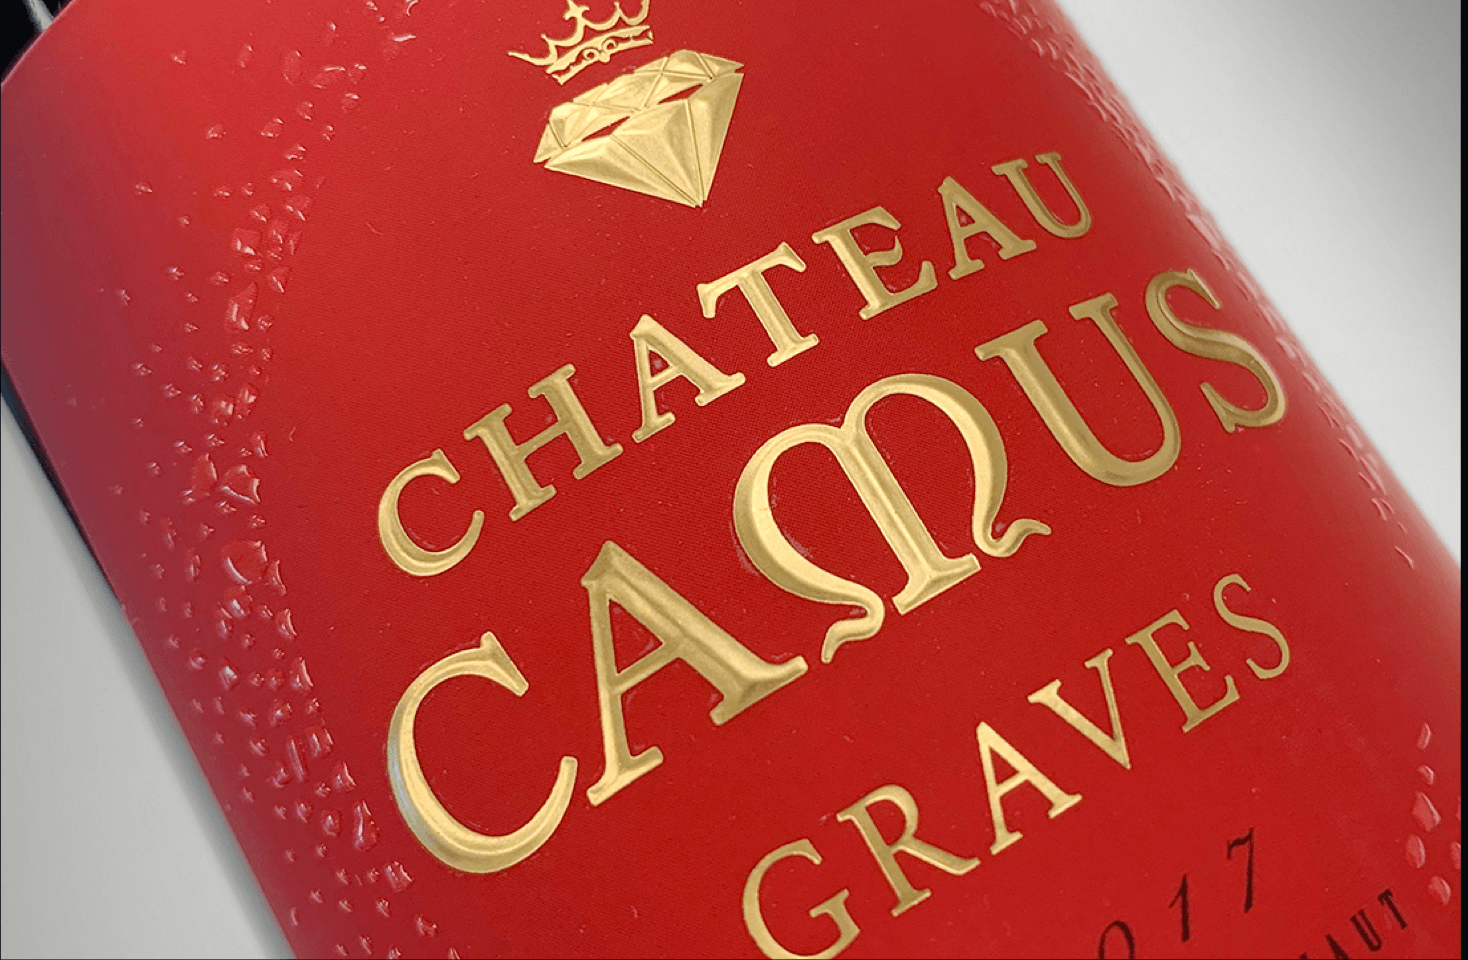 Image of A renewed label for the Château Camus’ collection